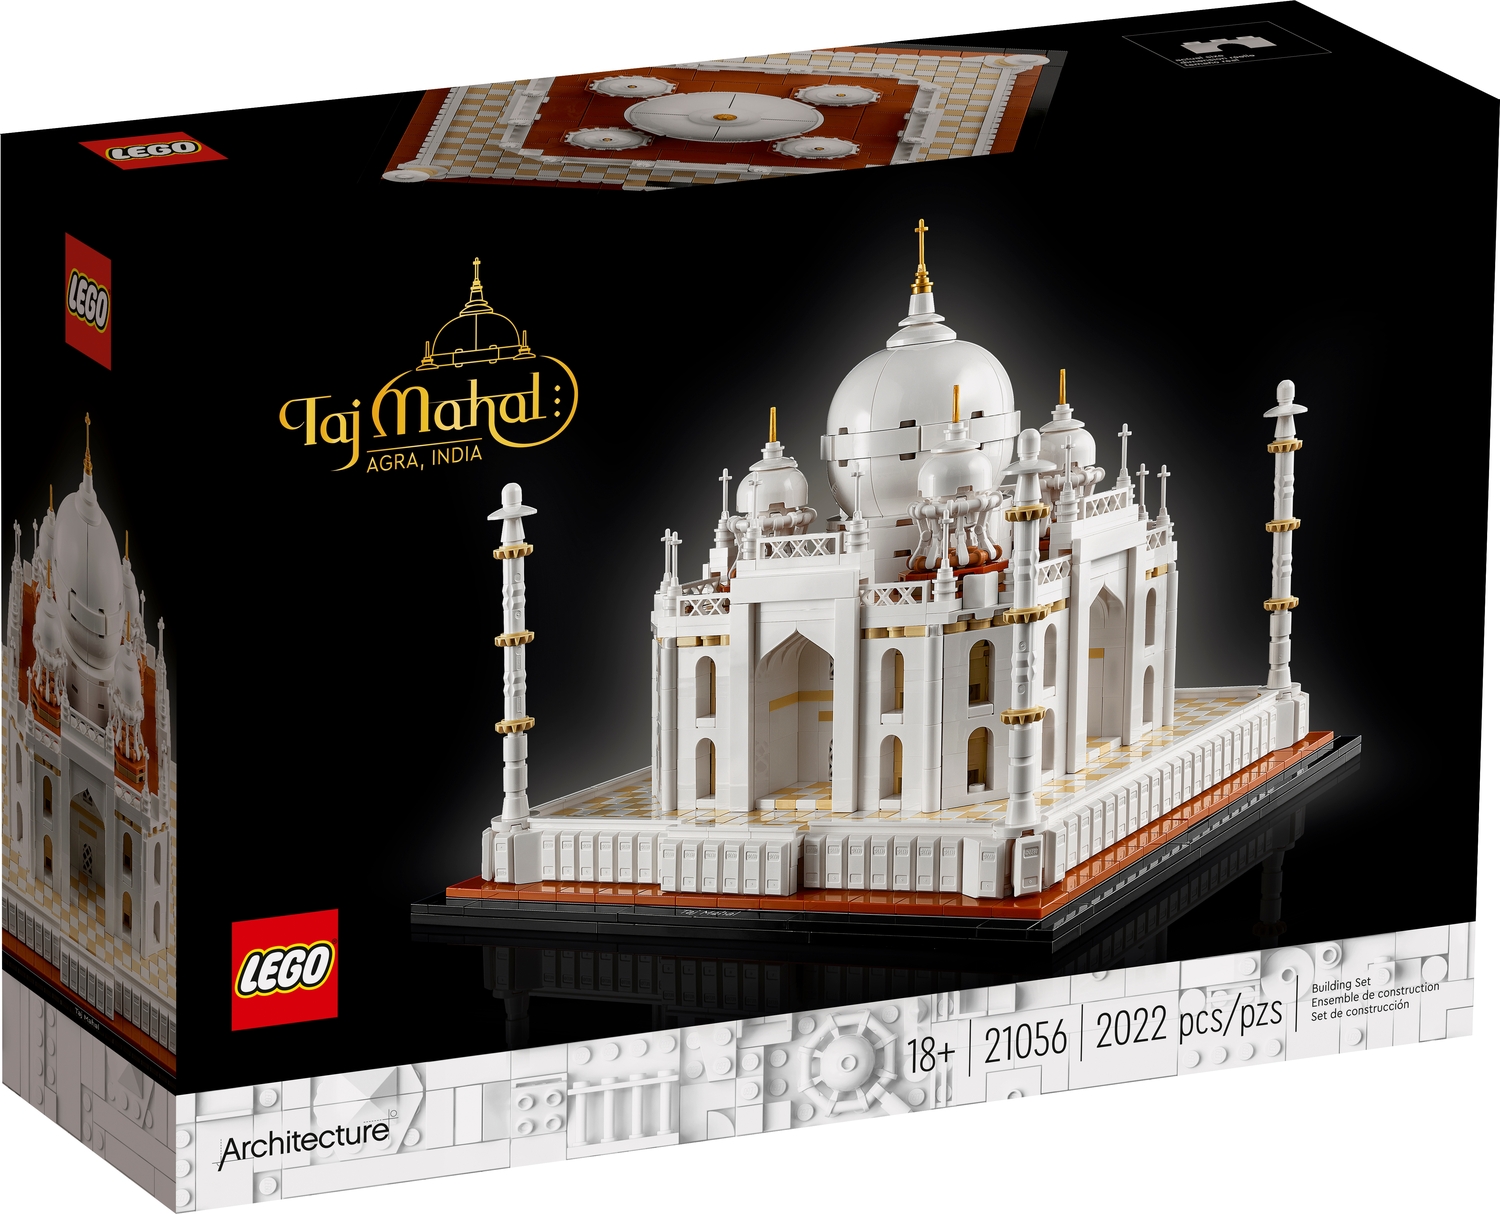 Perfect Toys Gifts for Kids and Adults 2012 Pieces Castle Palace Construction Building Blocks Collectible Build and Display Model Architecture Taj Mahal Building Toy 